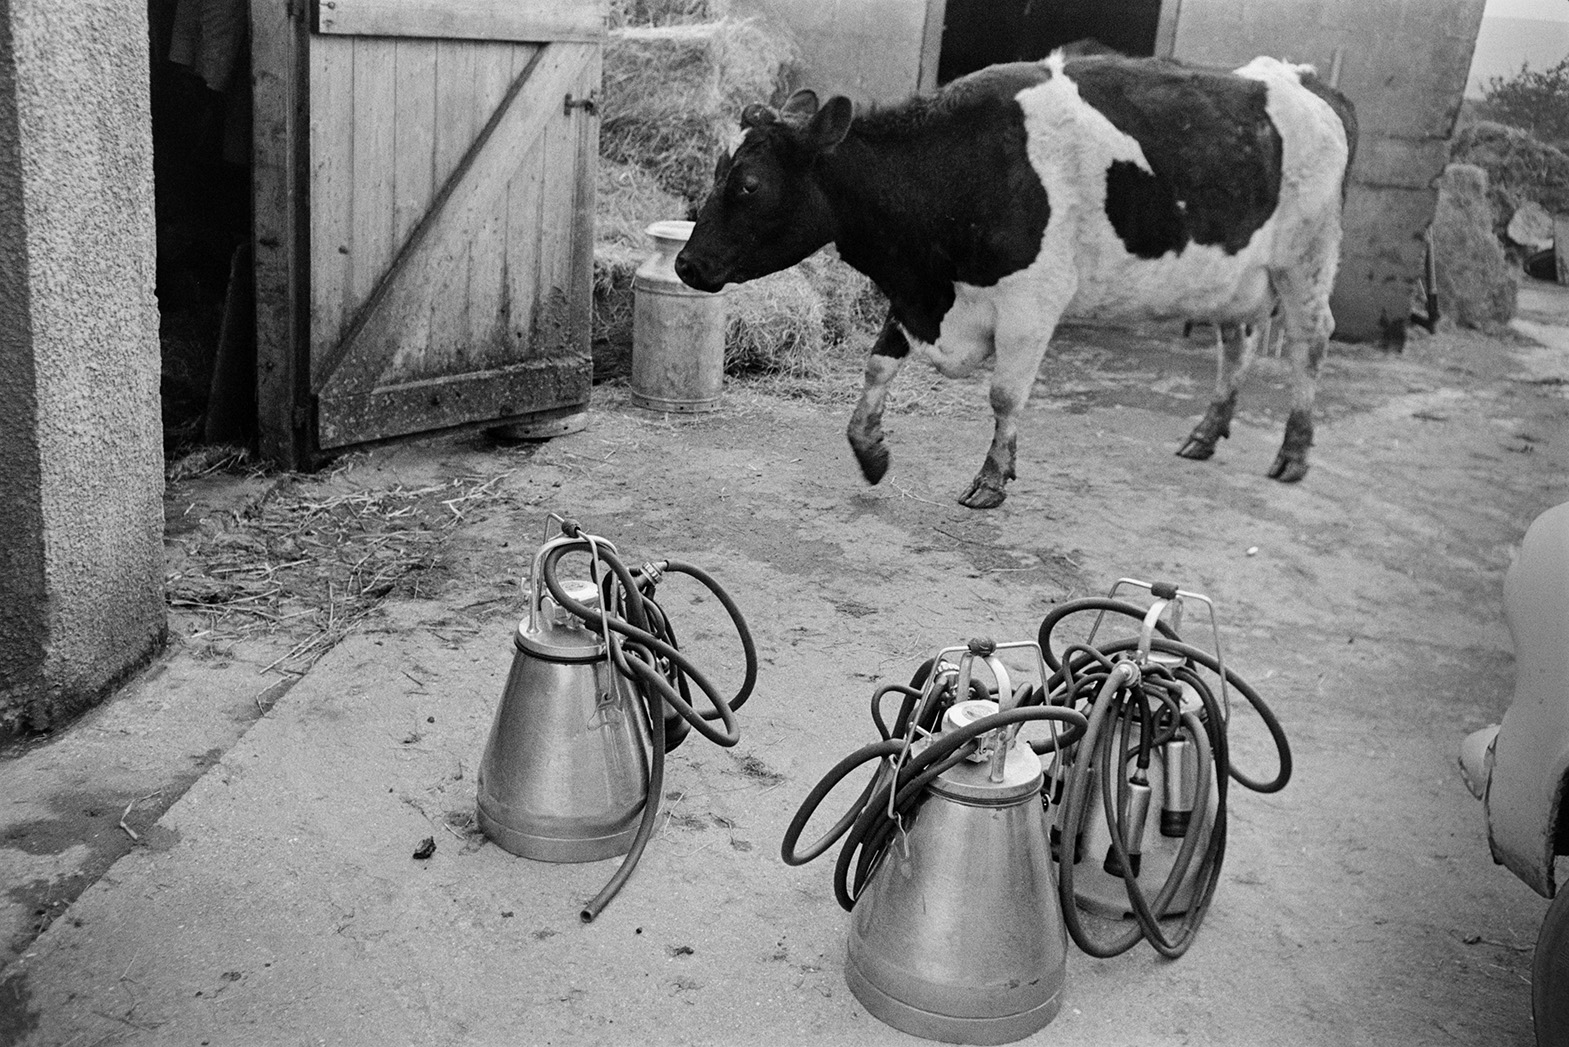 Milking machines in the farmyard at Mill Road Farm, Beaford. A cow is walking past hay bales into a barn in the background, possibly going to be miked. The farm was also known as Jeffrys.